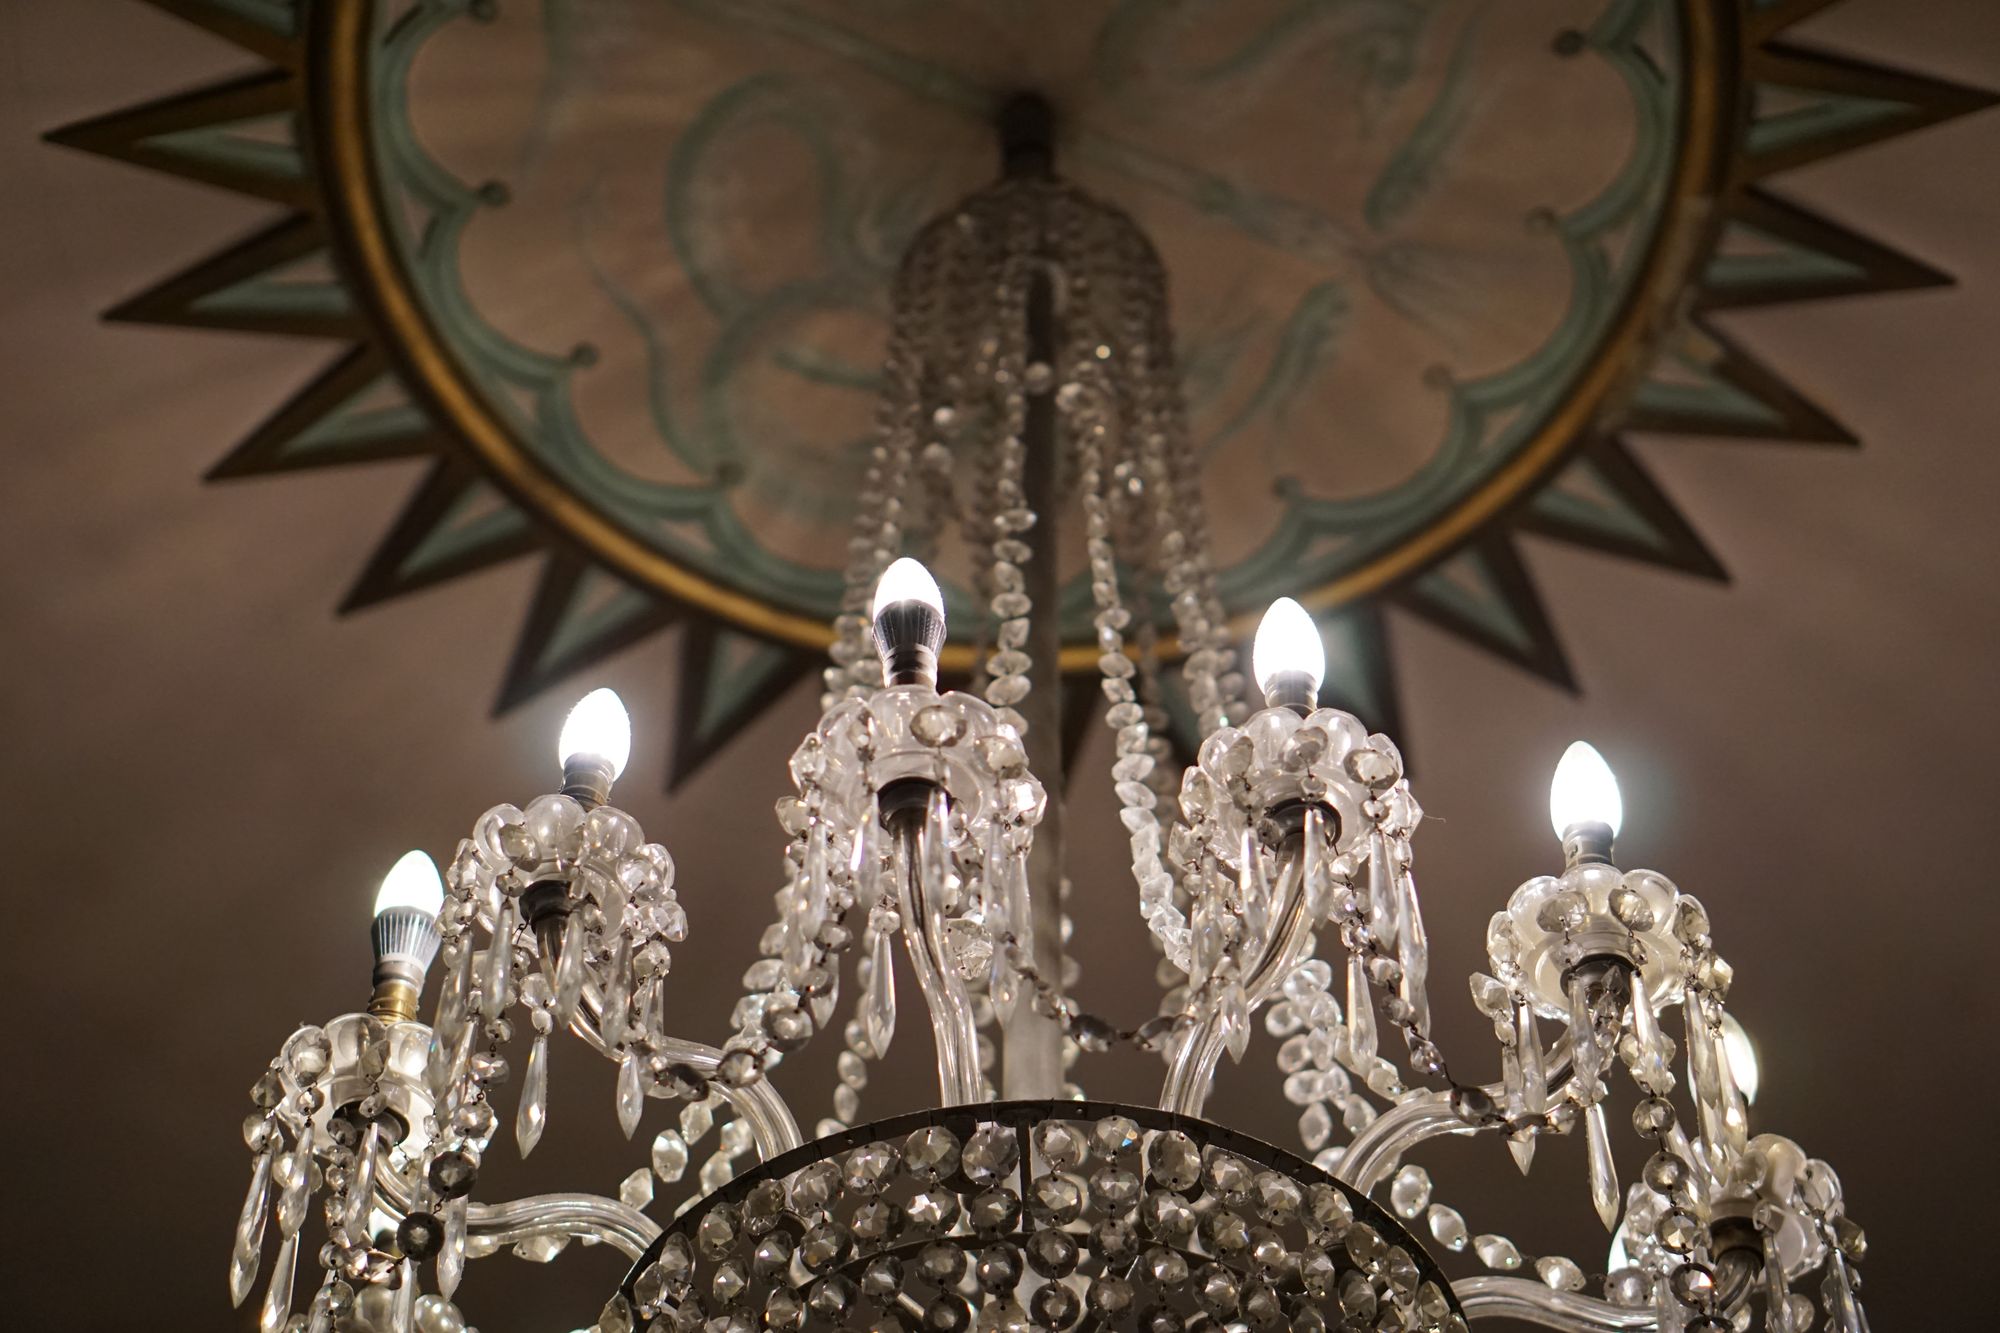 Another, slightly smaller and more tasteful, chandelier, with glass ‘pearl’ and ‘teardrop’ like formations forming a circle.